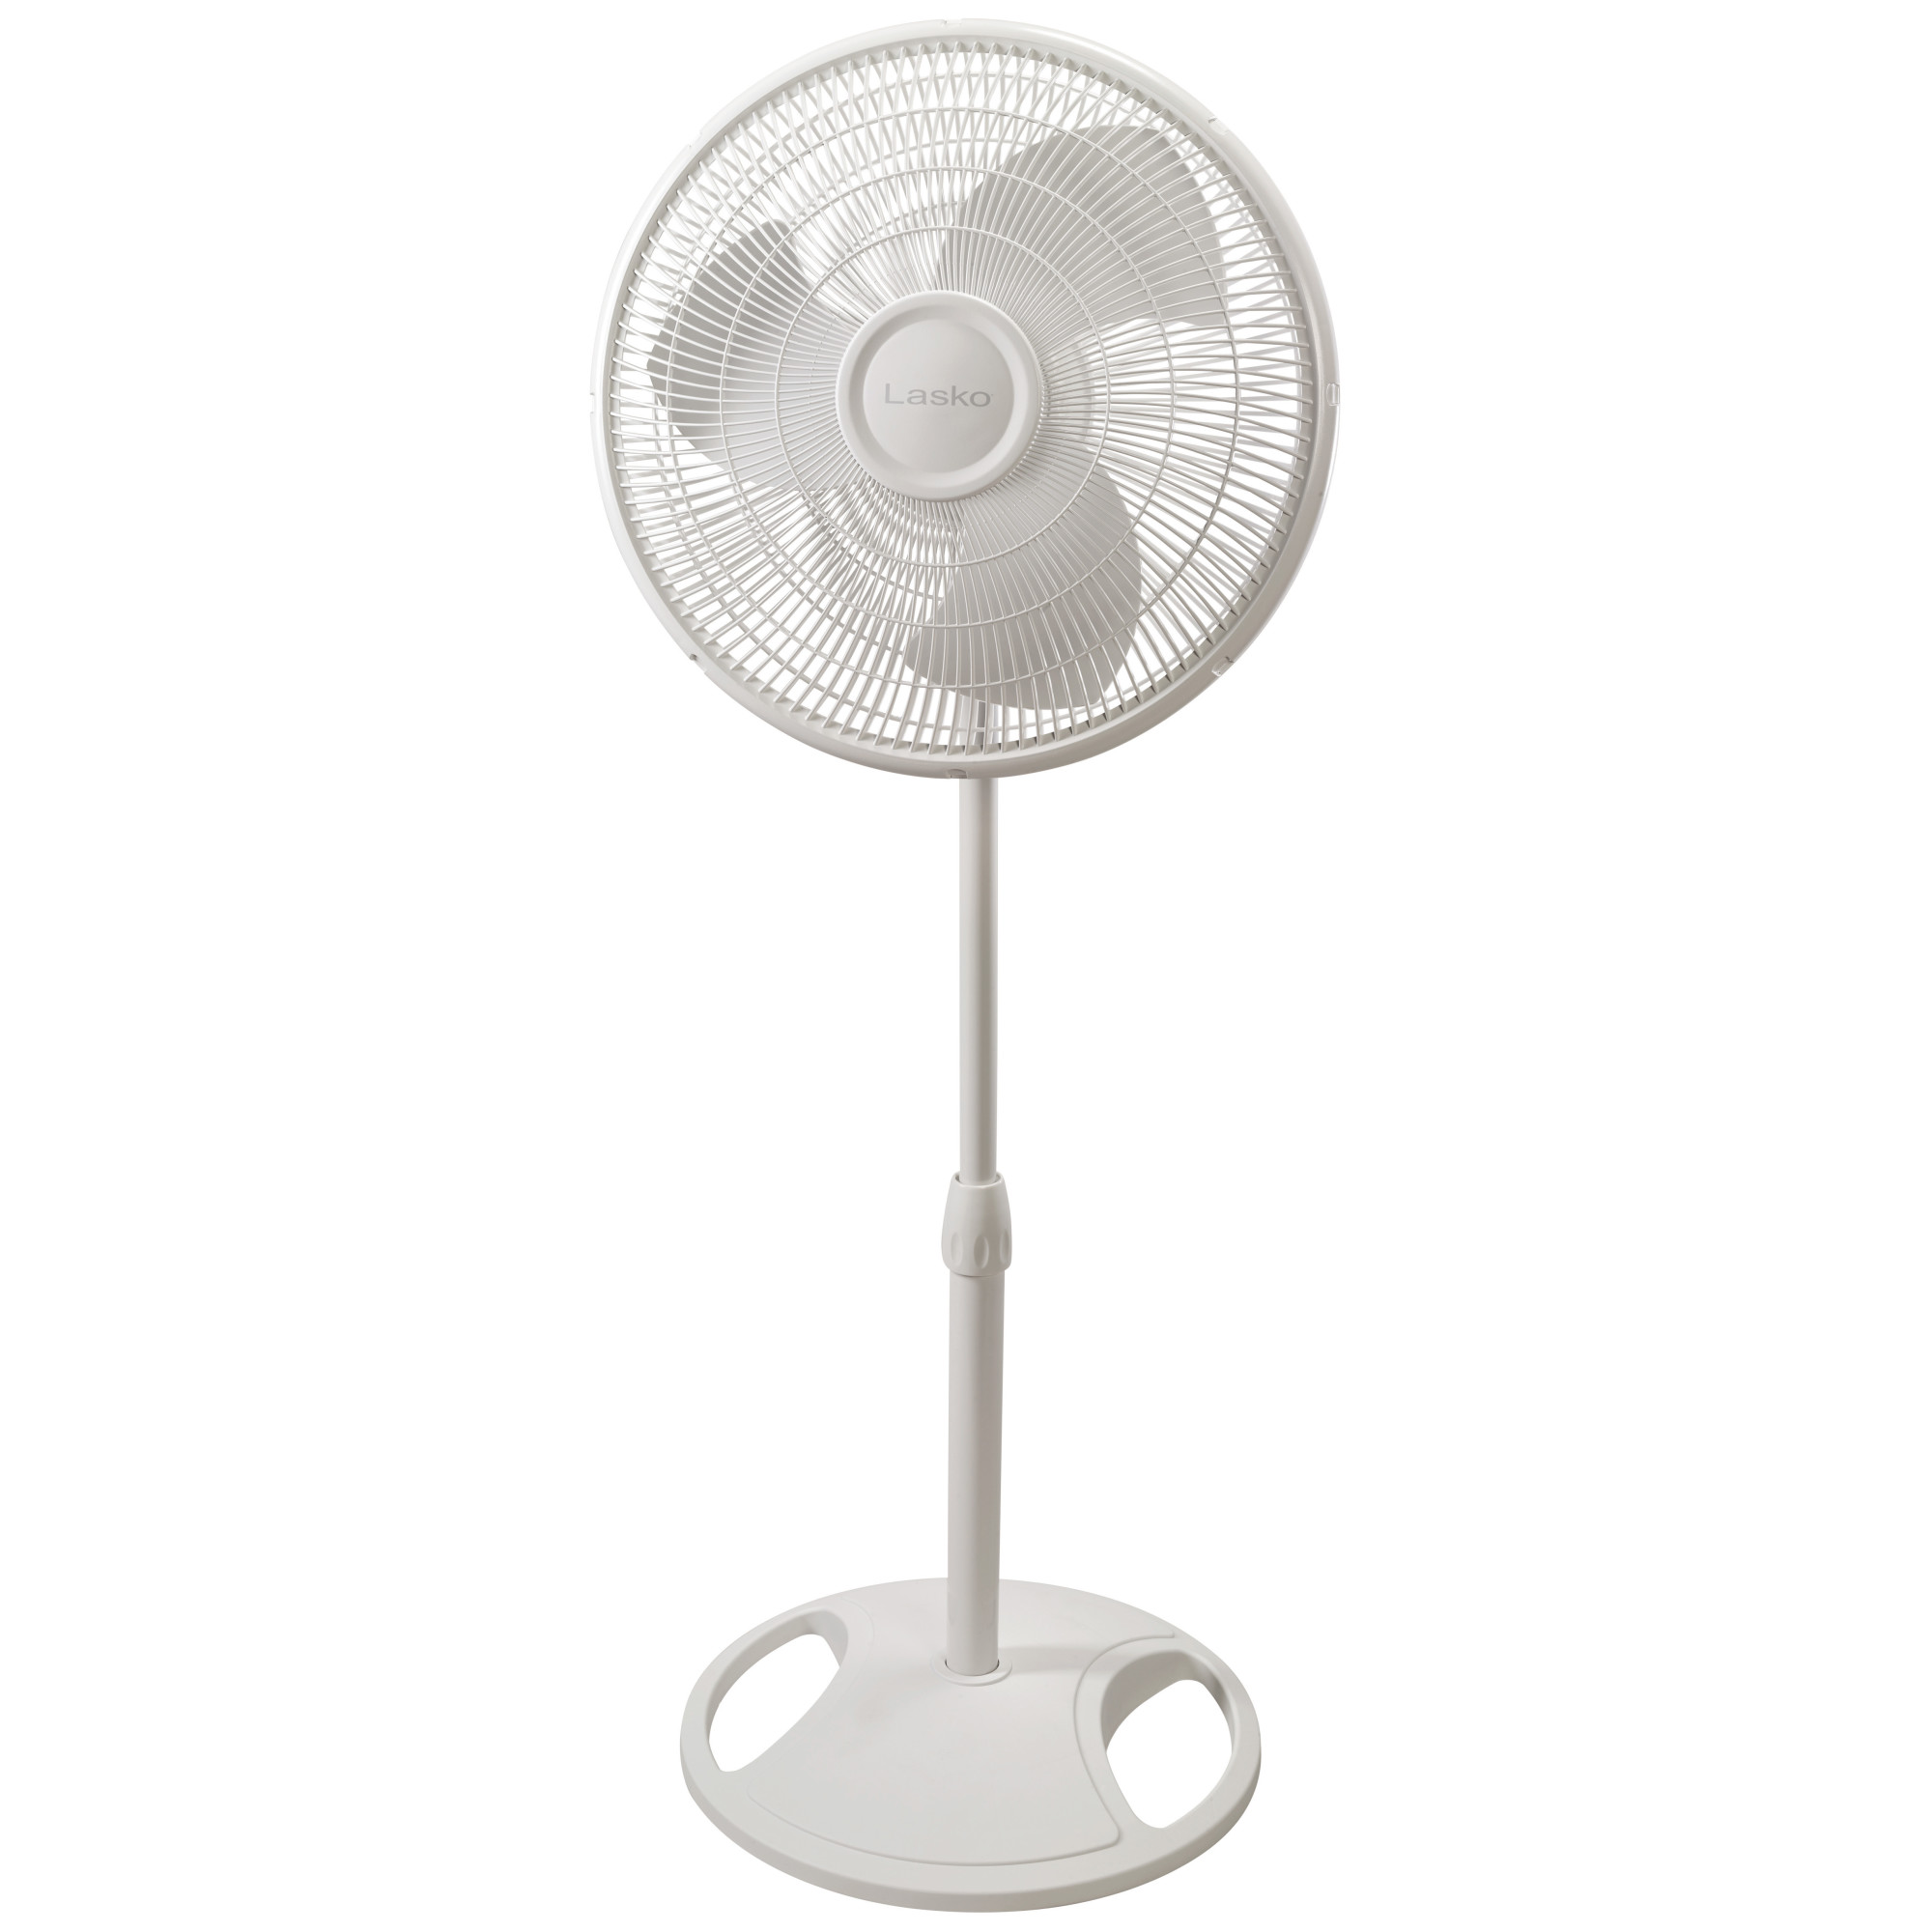 Lasko 16" Oscillating 3-Speed Pedestal Fan with Adjustable Height, 47" H, White, S16200, New - image 1 of 7